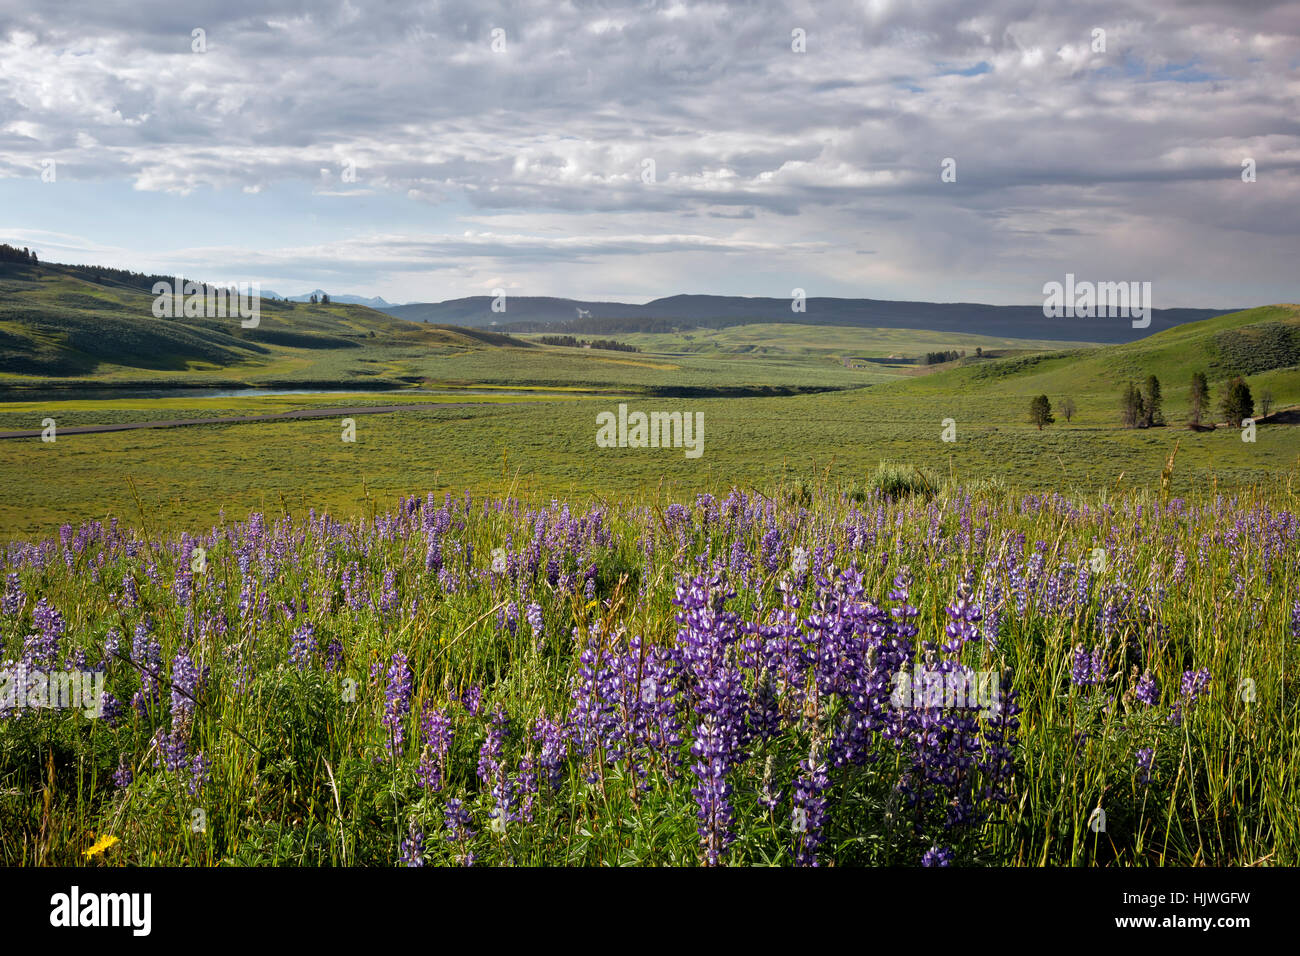 WYOMING - Lupine covered hillside overlooking the Yellowstone River in the Hayden Valley of Yellowstone National Park. Stock Photo